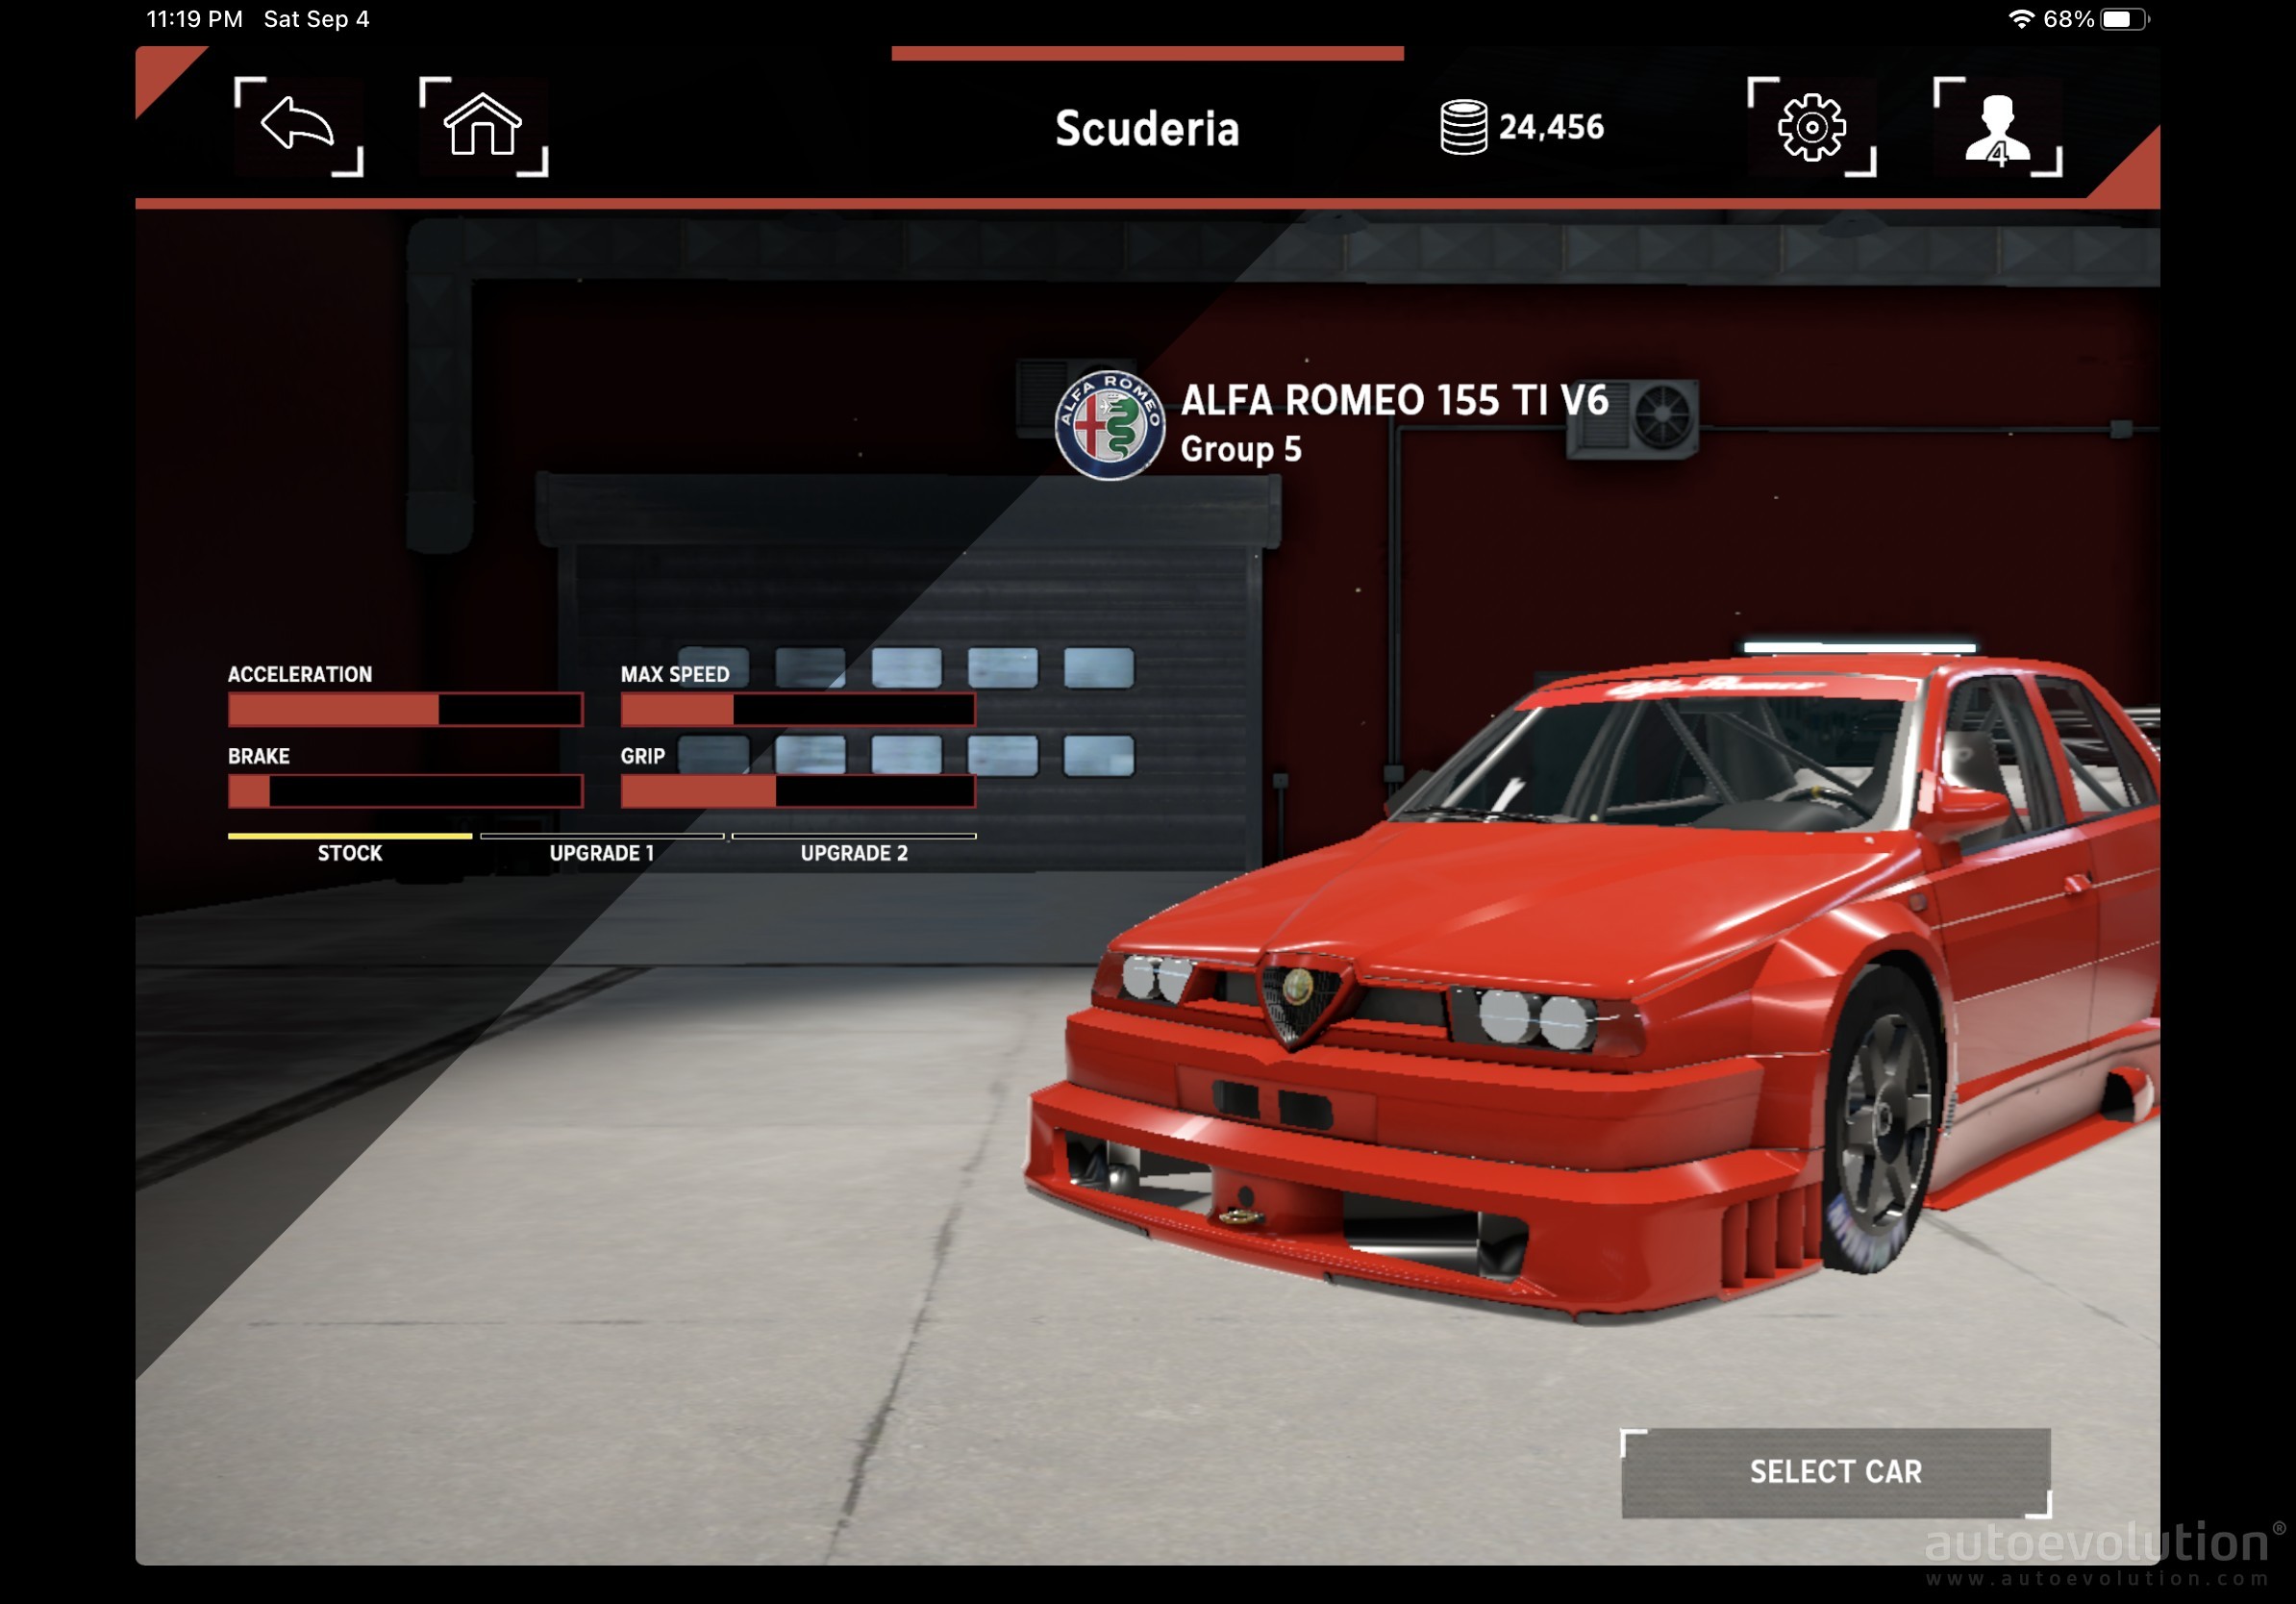 Assetto Corsa Mobile Review Ios An Unconvincing First Attempt At